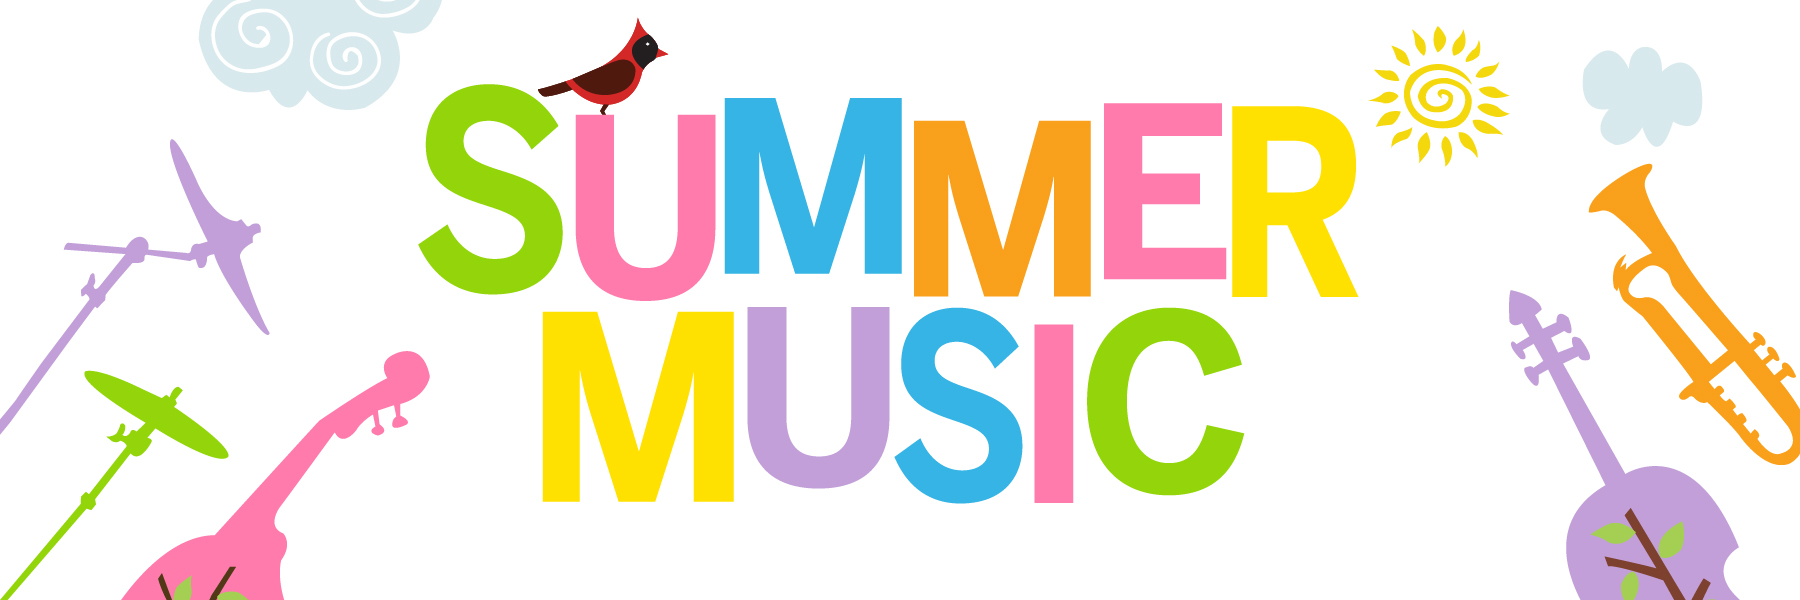 Summer Music title art with colorful lettering, and illustrated cardinal, clouds, sun, and assorted instruments.